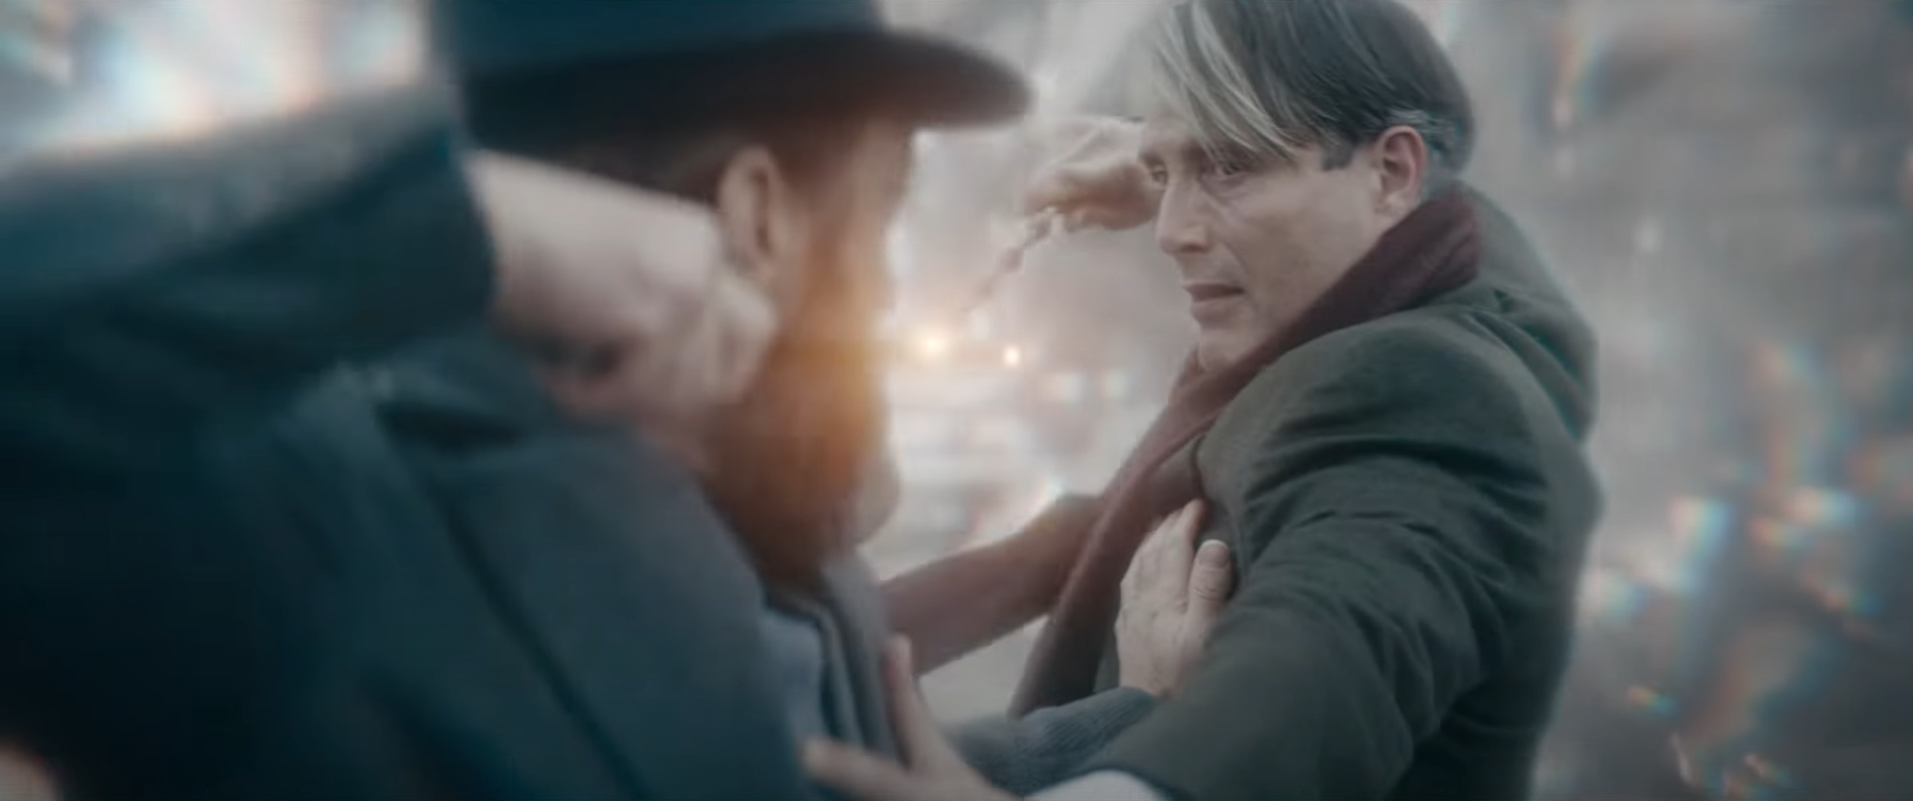 Mads Mikkelsen and Jude Law in Fantastic Beasts 3  